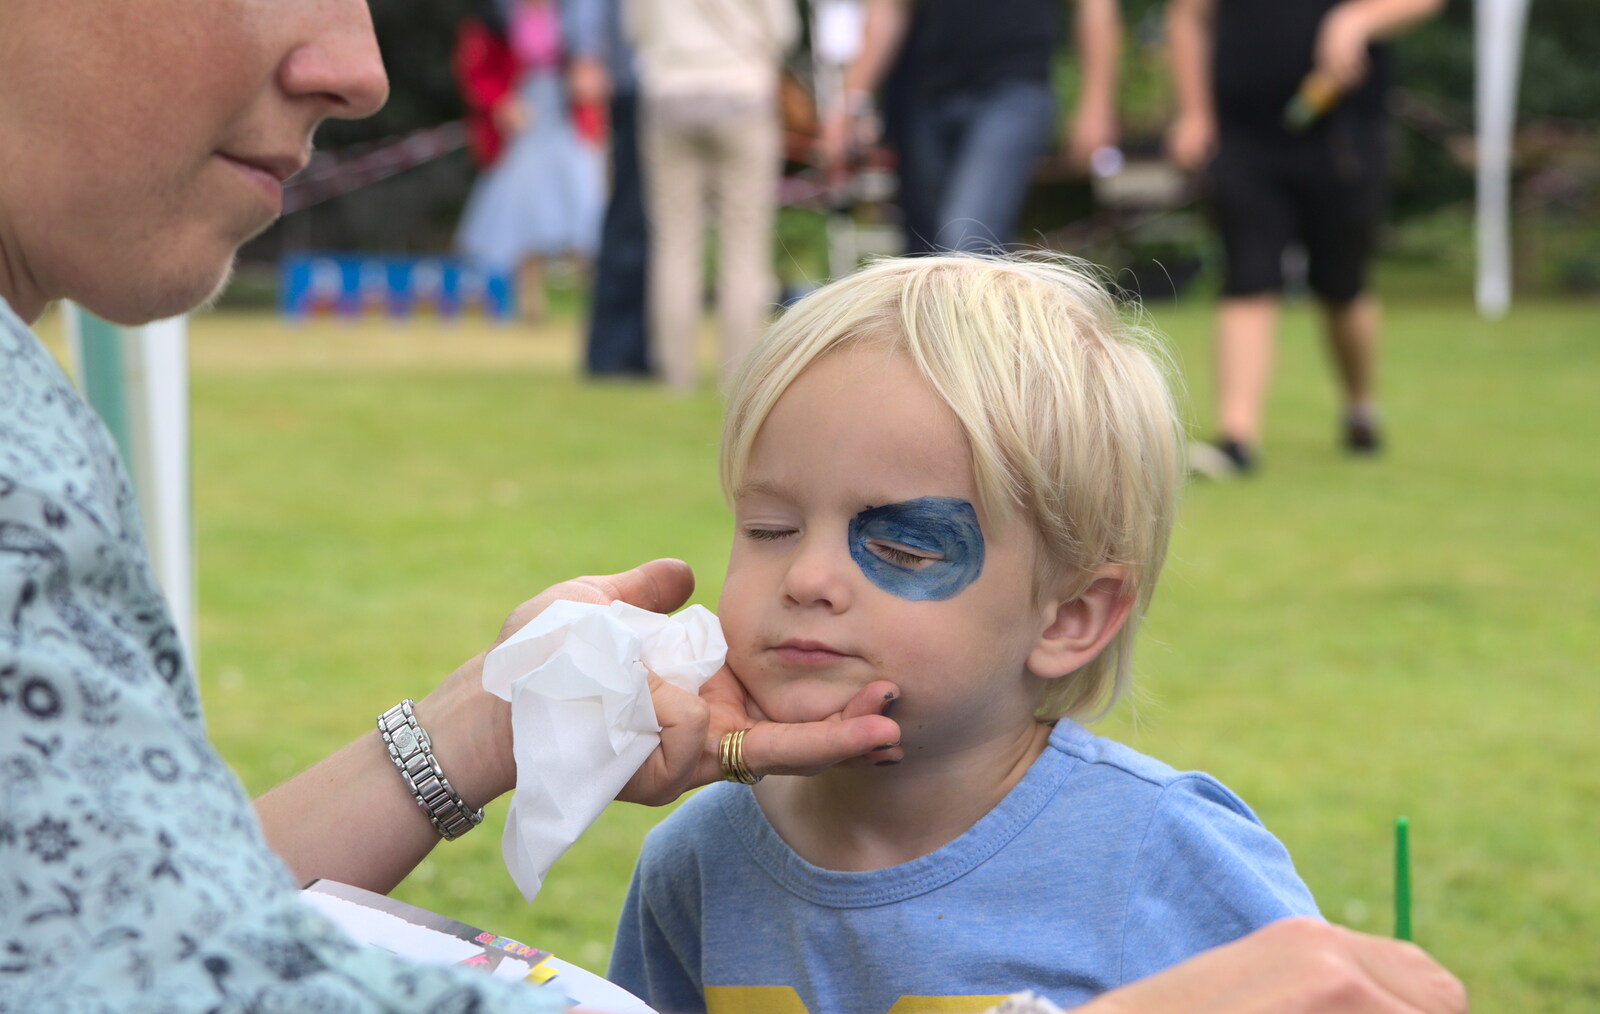 Harry gets the face paint treatment too from The Village Summer Fête, Brome, Suffolk - 5th July 2014